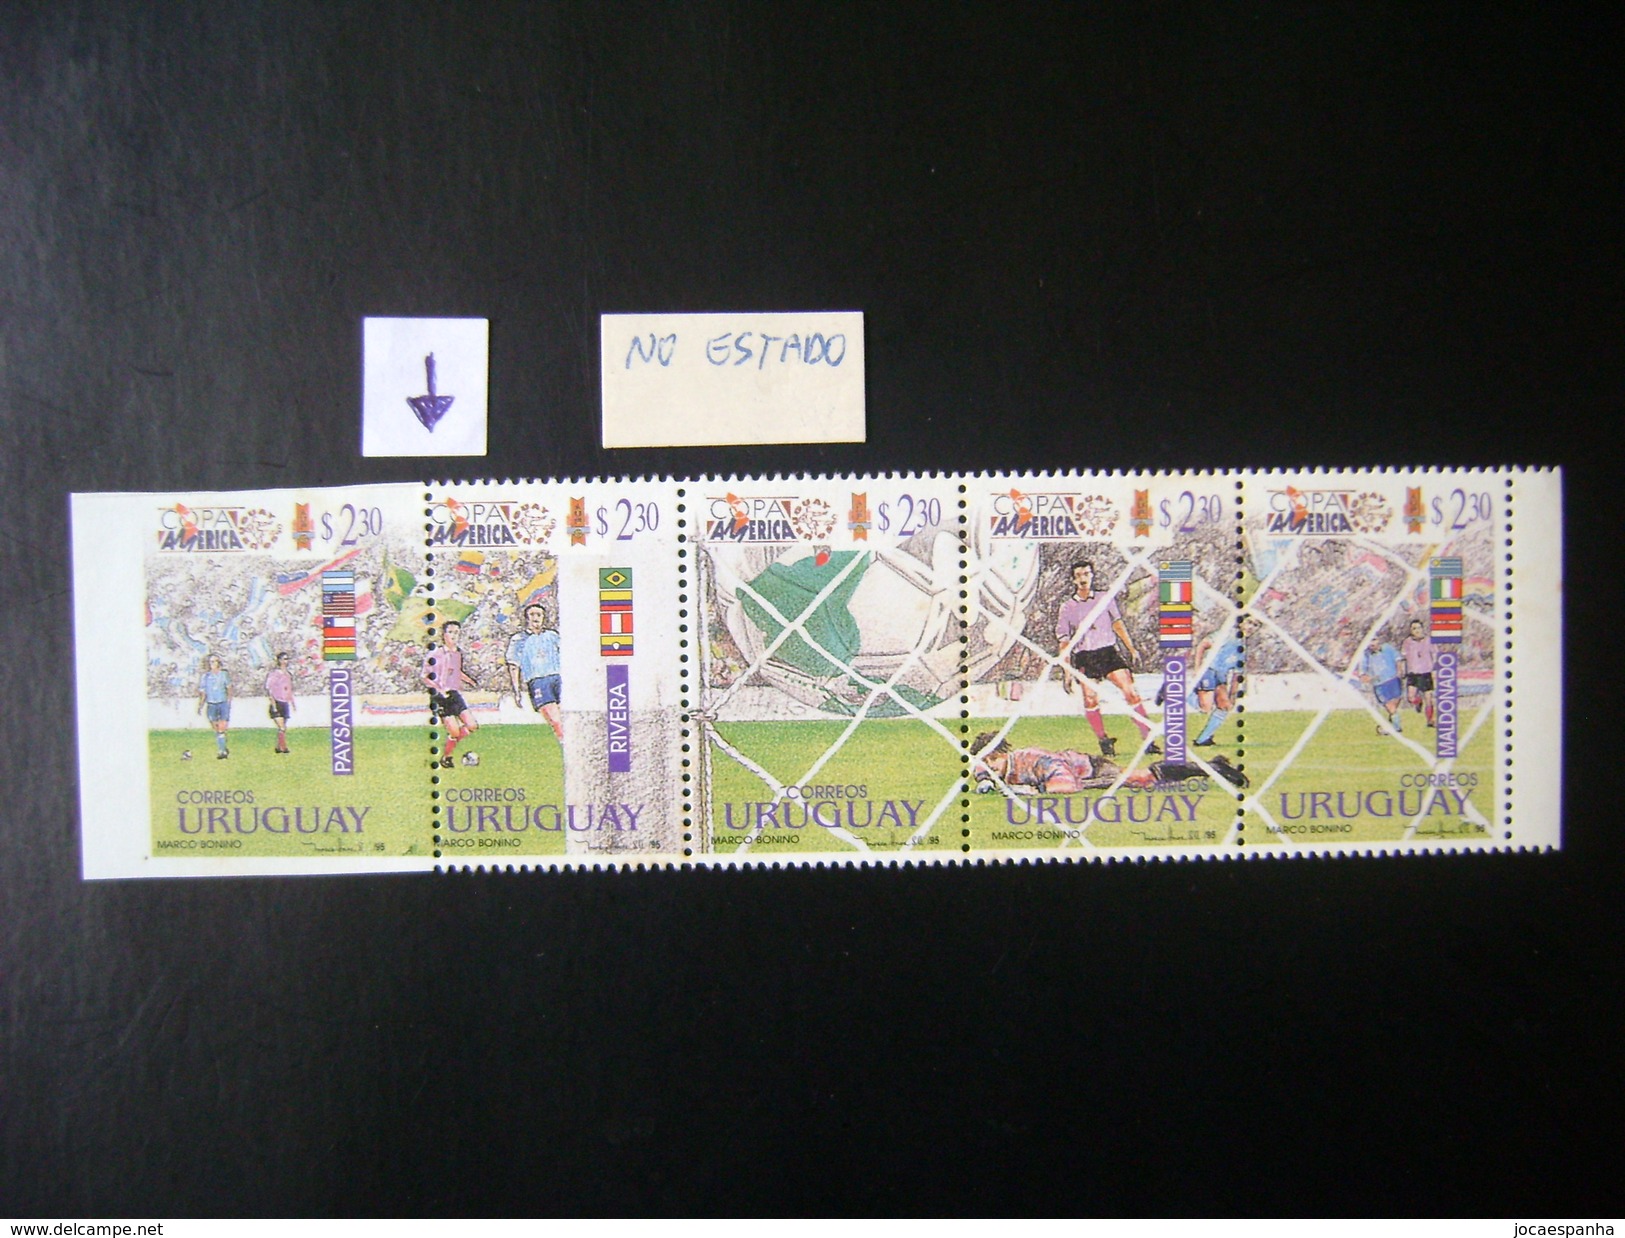 URUGUAY (COPA AMERICA 95) - COMPLETE STRIP WITH PICOTE DISPLACED IN 2 STAMPS - Soccer American Cup